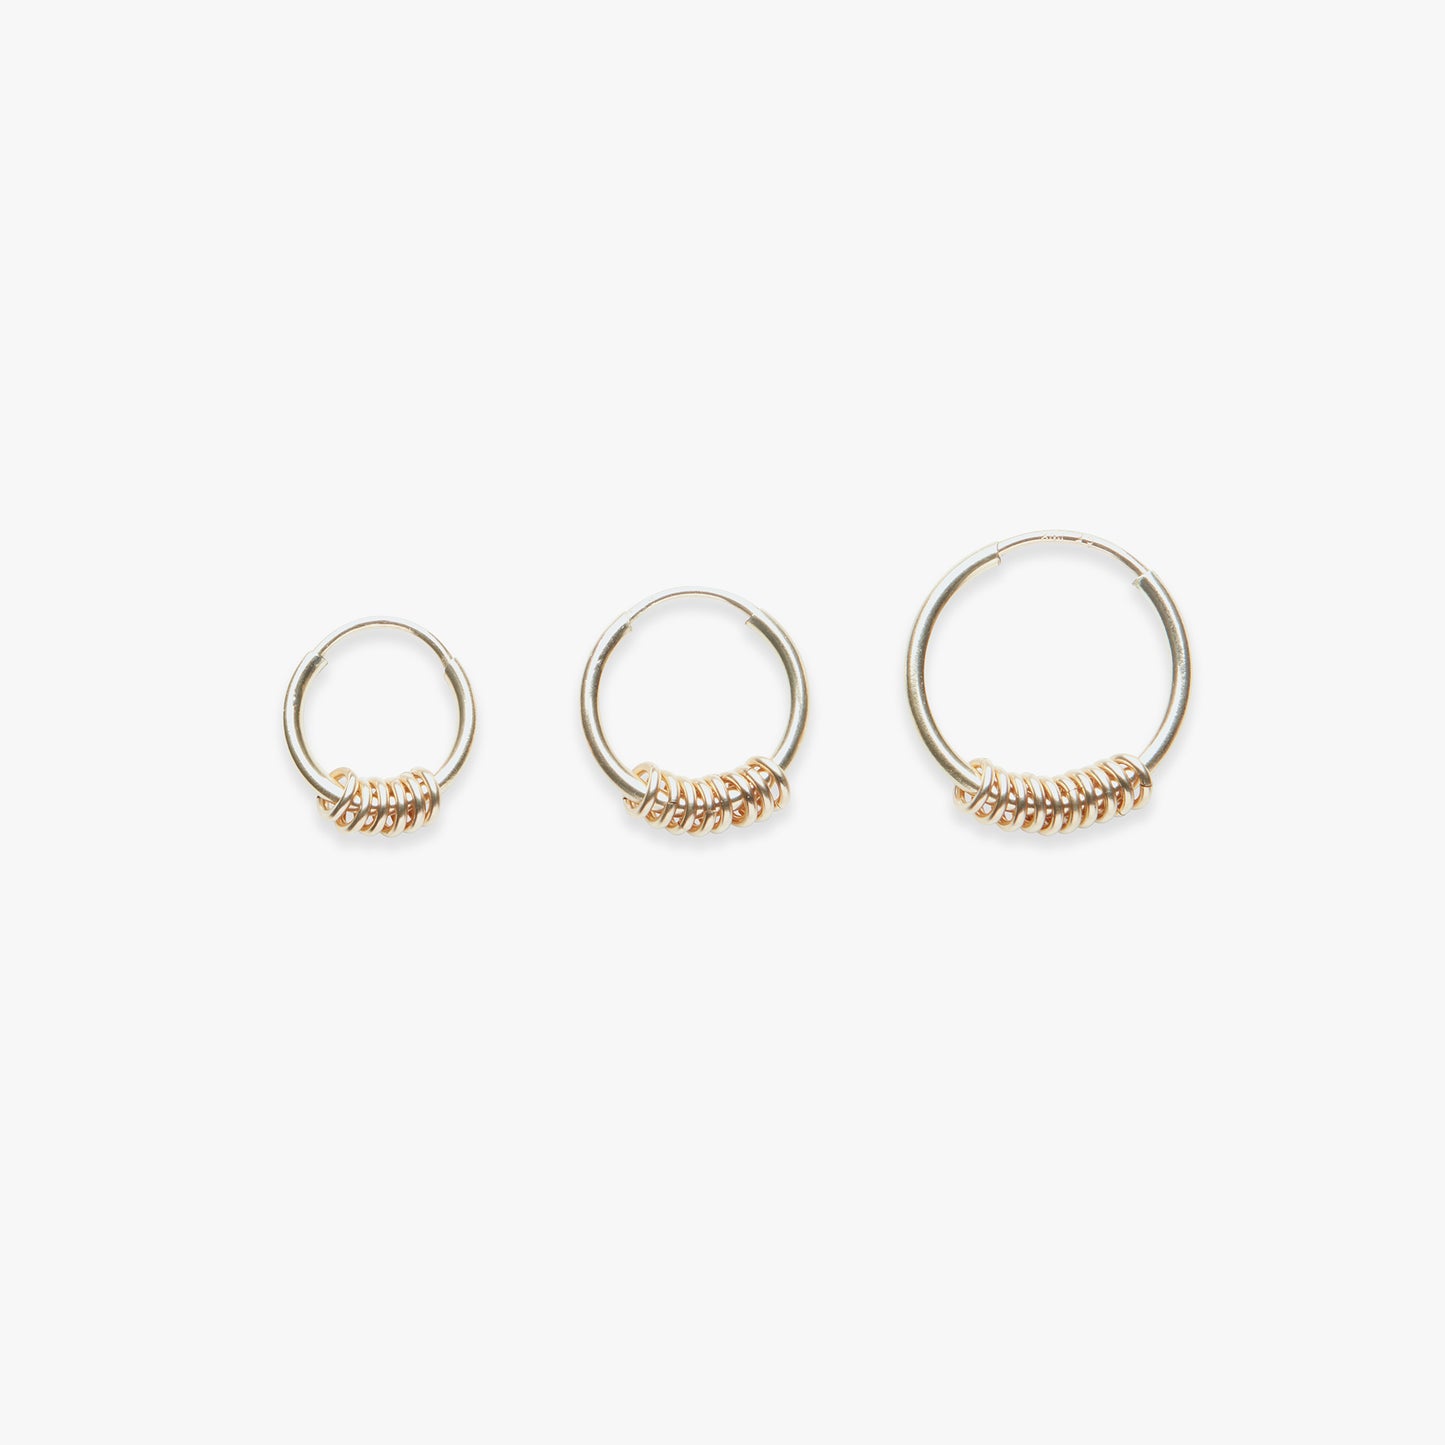 Tiny rings earring gold filled